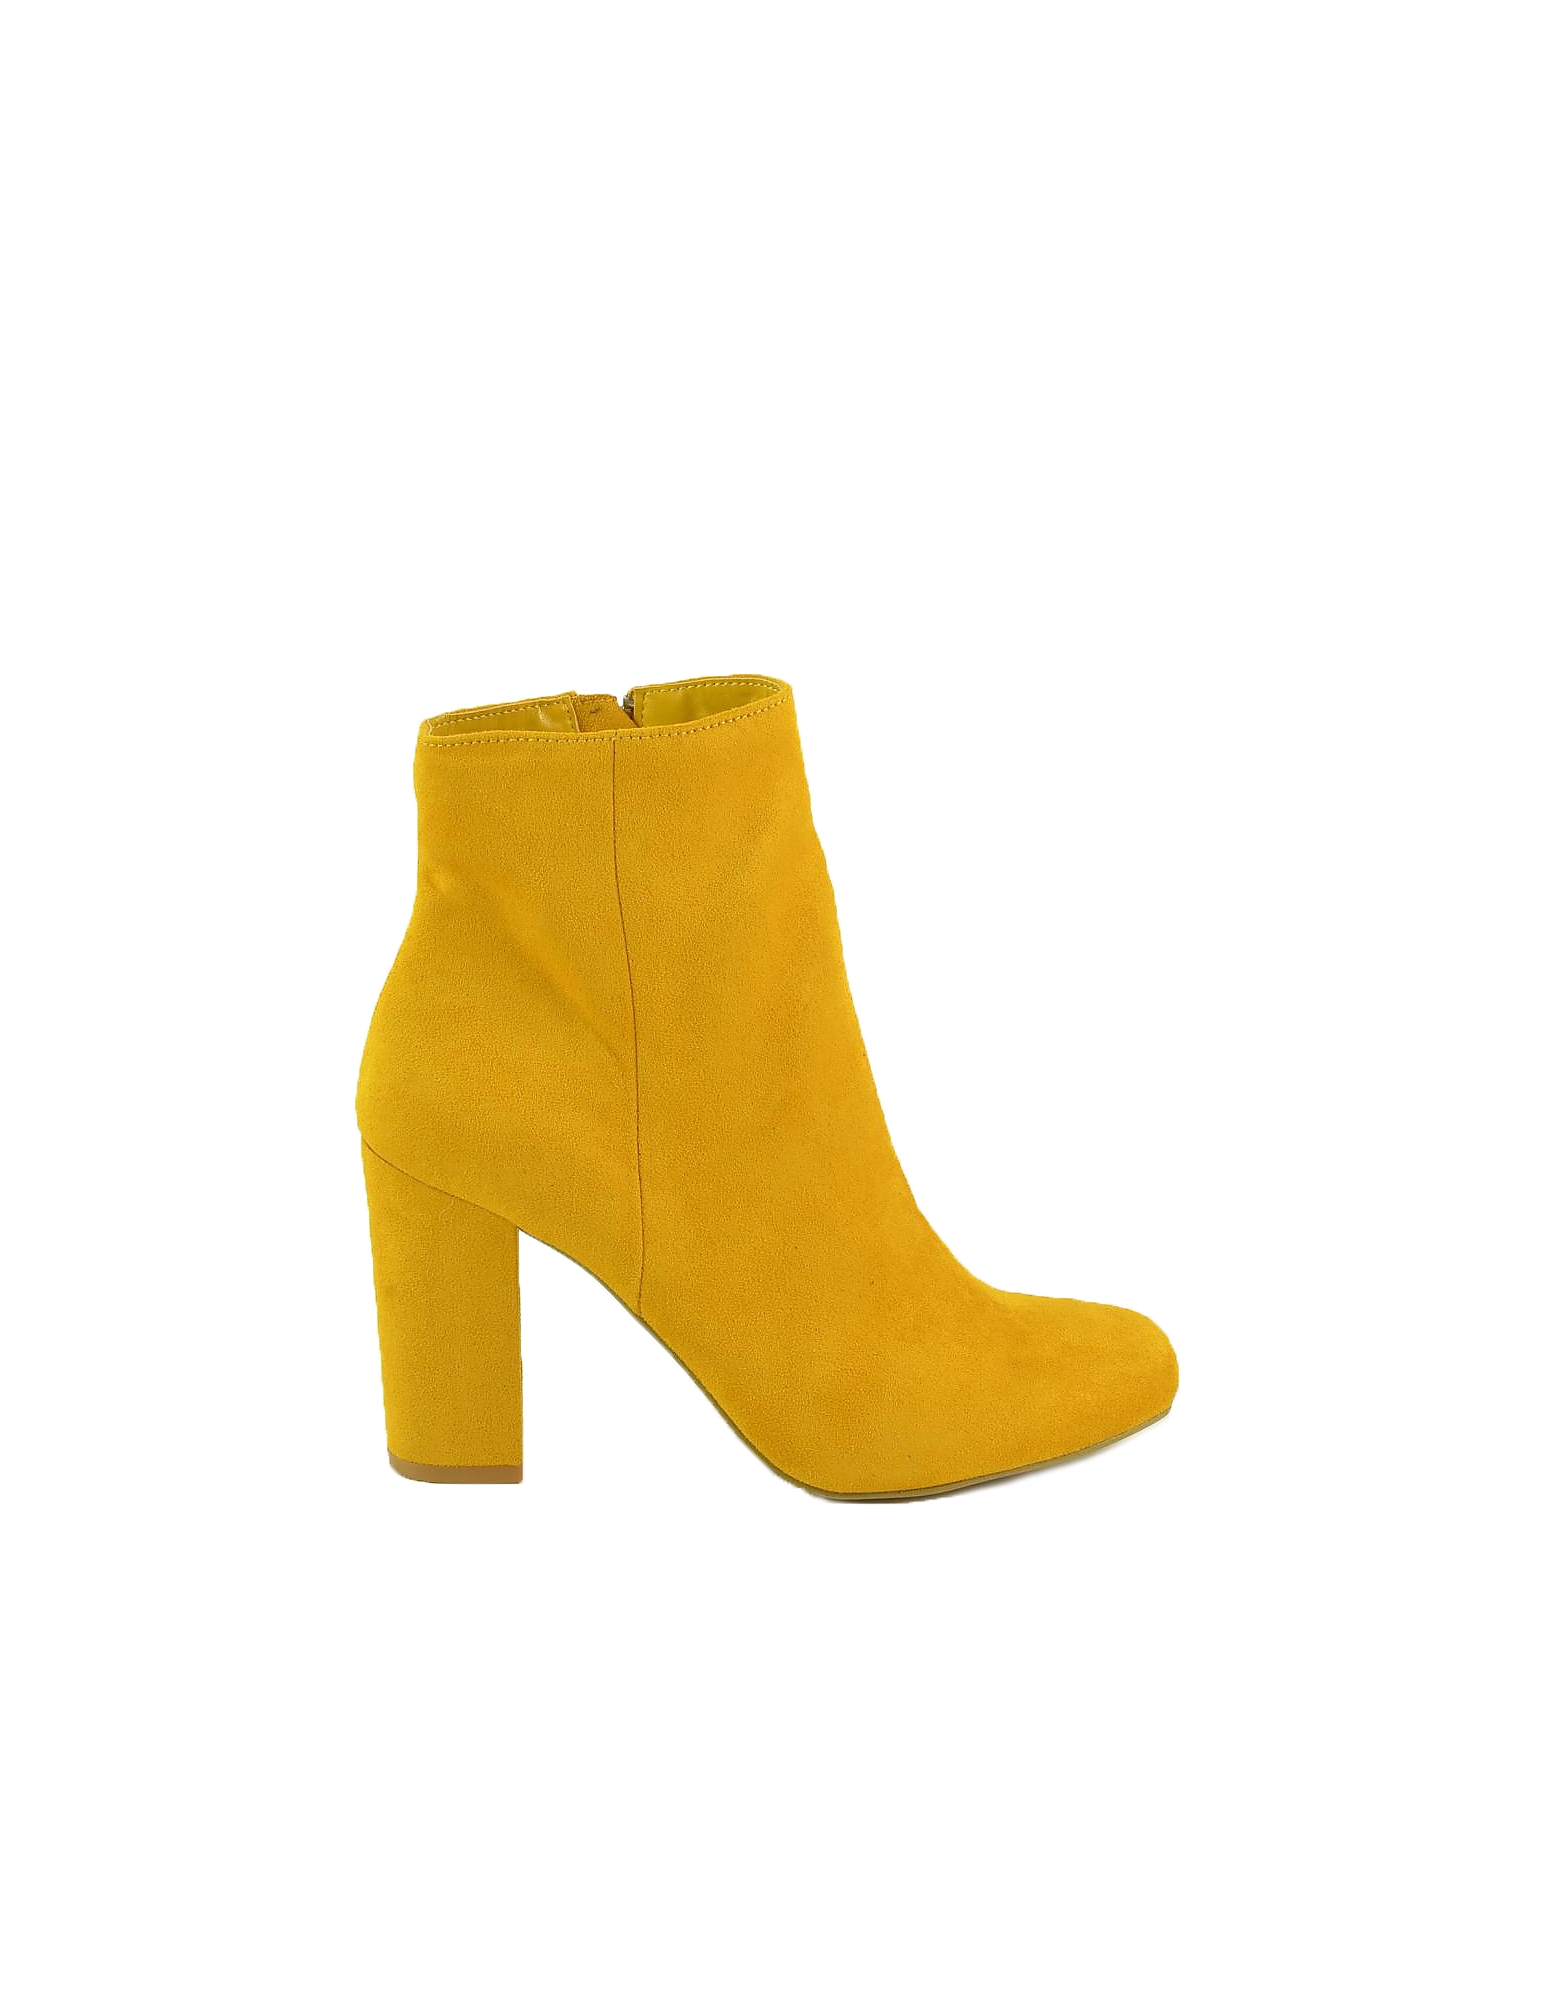 Steve Madden  Shoes Mustard Yellow Suede Booties